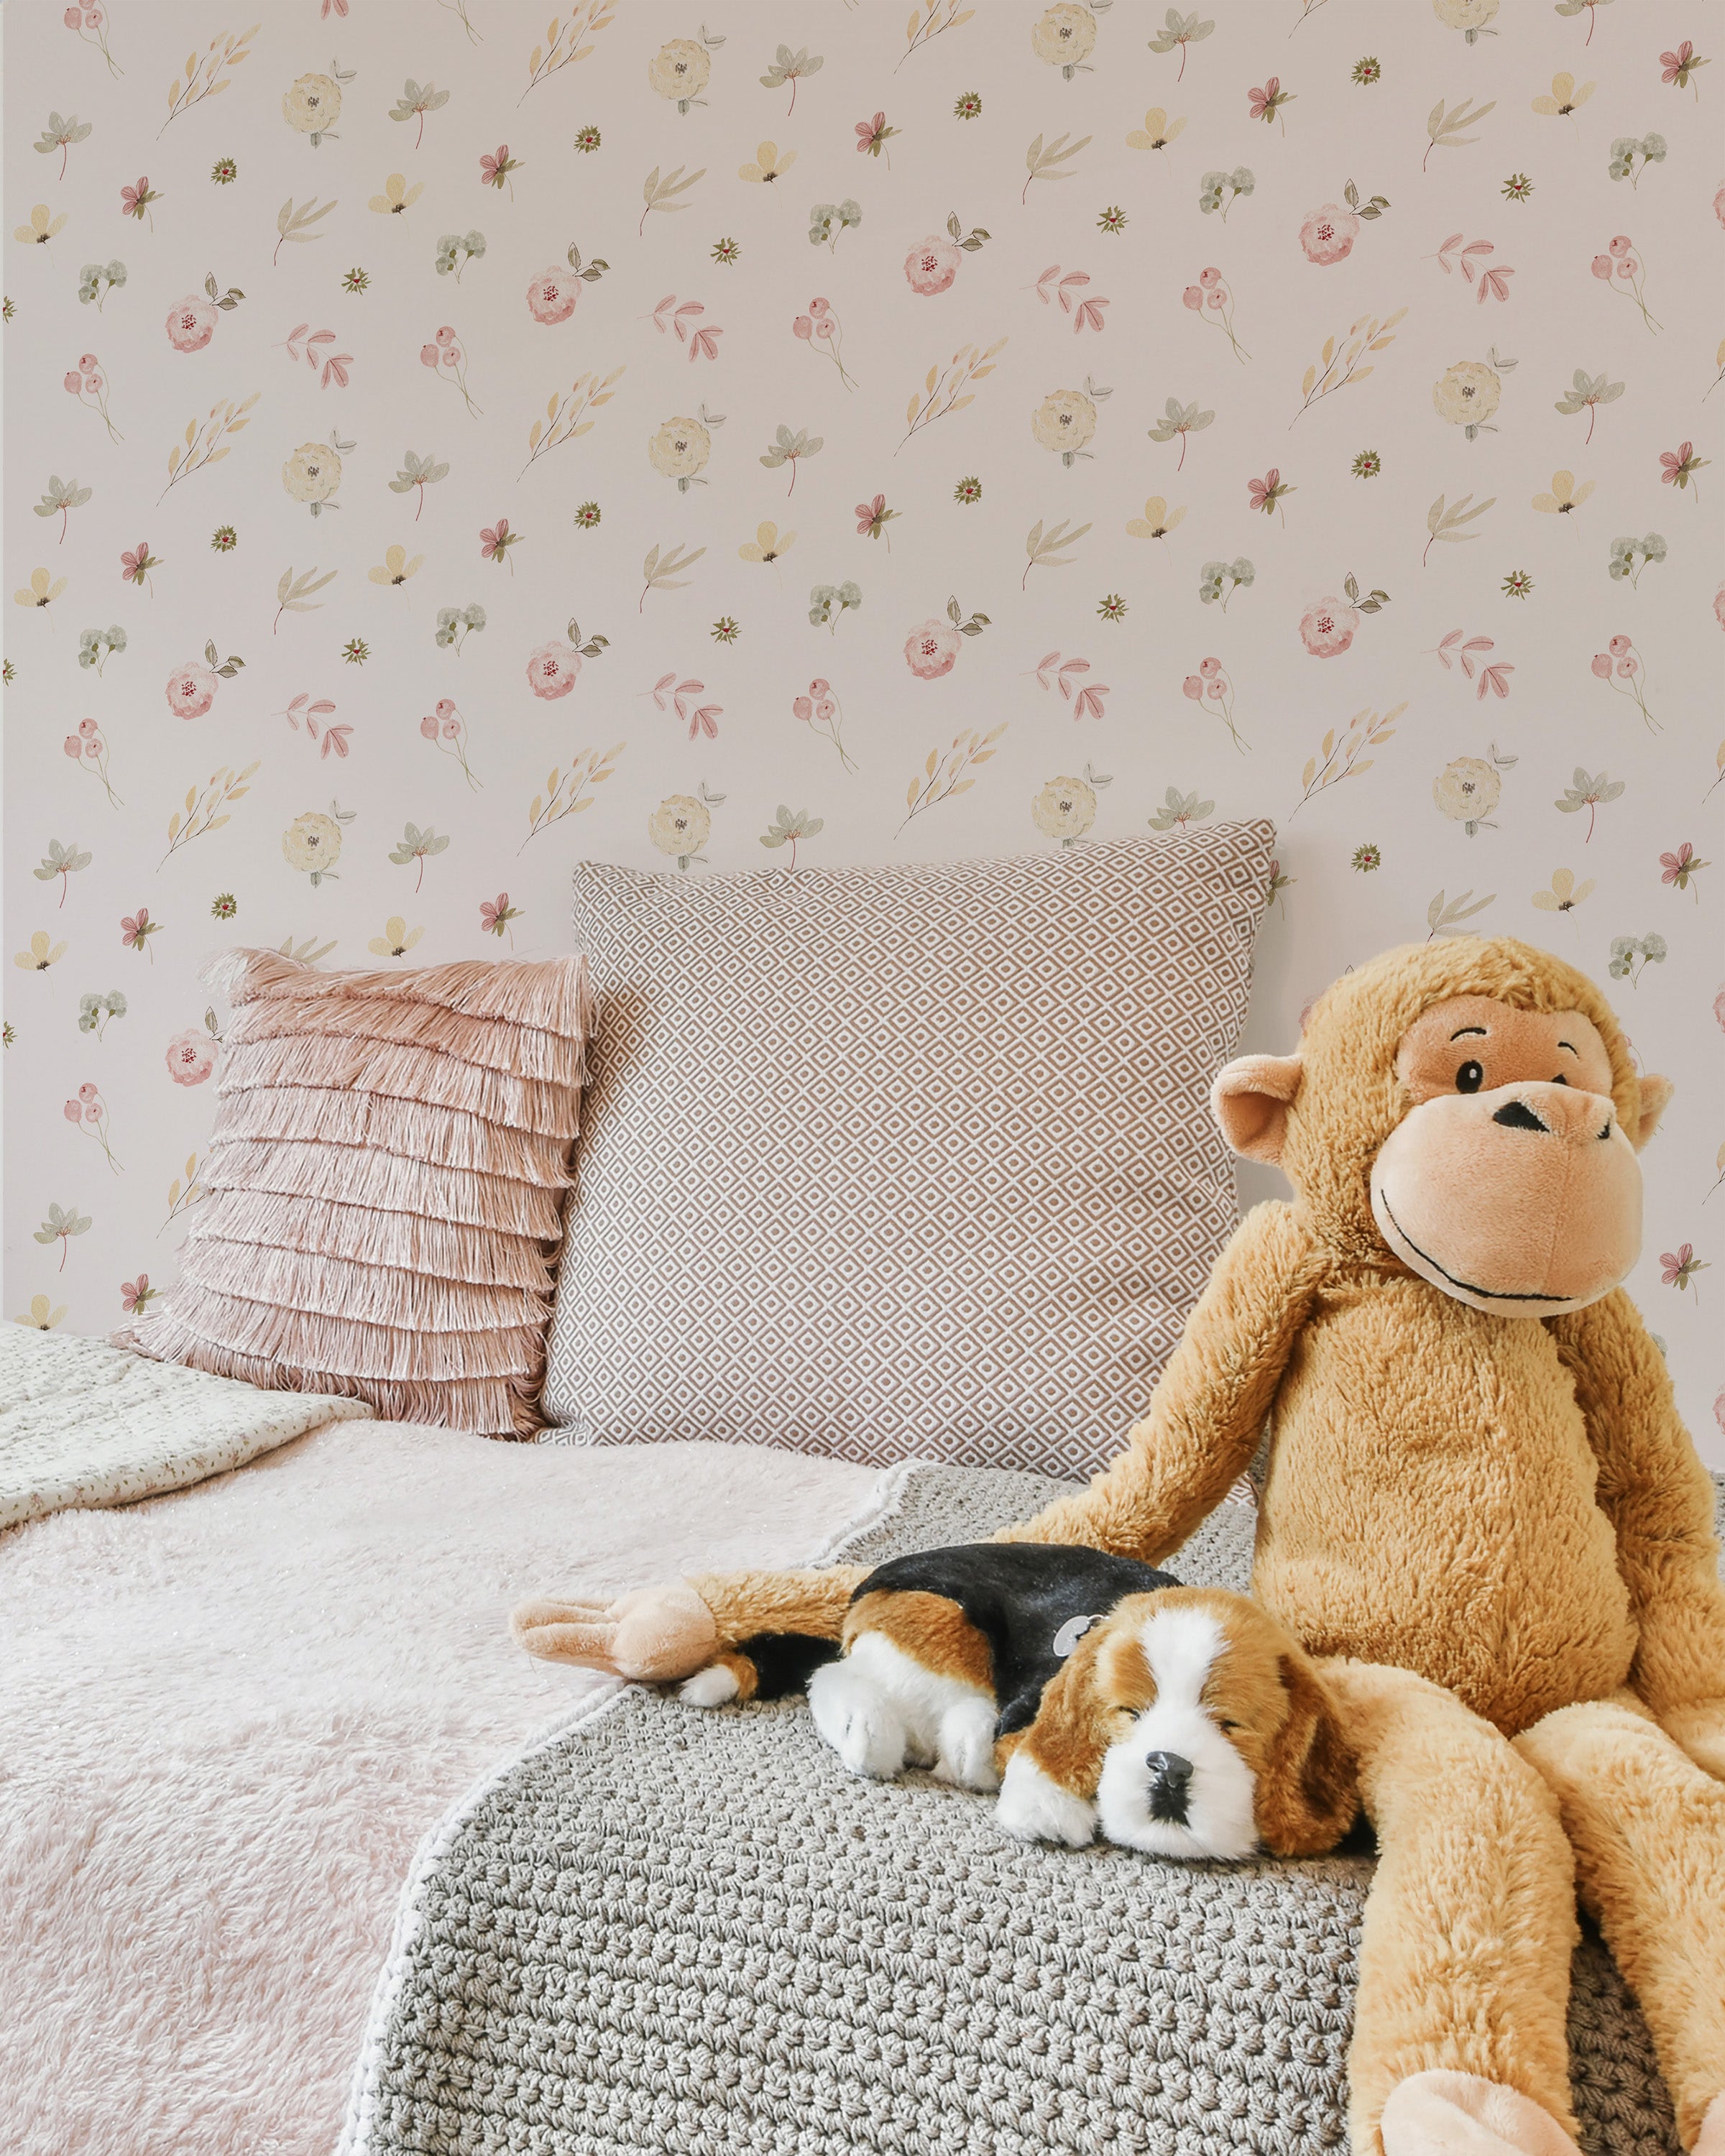 A cozy bedroom corner featuring Pink Watercolour Floral Wallpaper II with a pattern of delicate pink and beige flowers scattered over a pale background. A large plush monkey and a stuffed dog sit on a textured gray crochet blanket, with decorative pillows adding a touch of elegance.